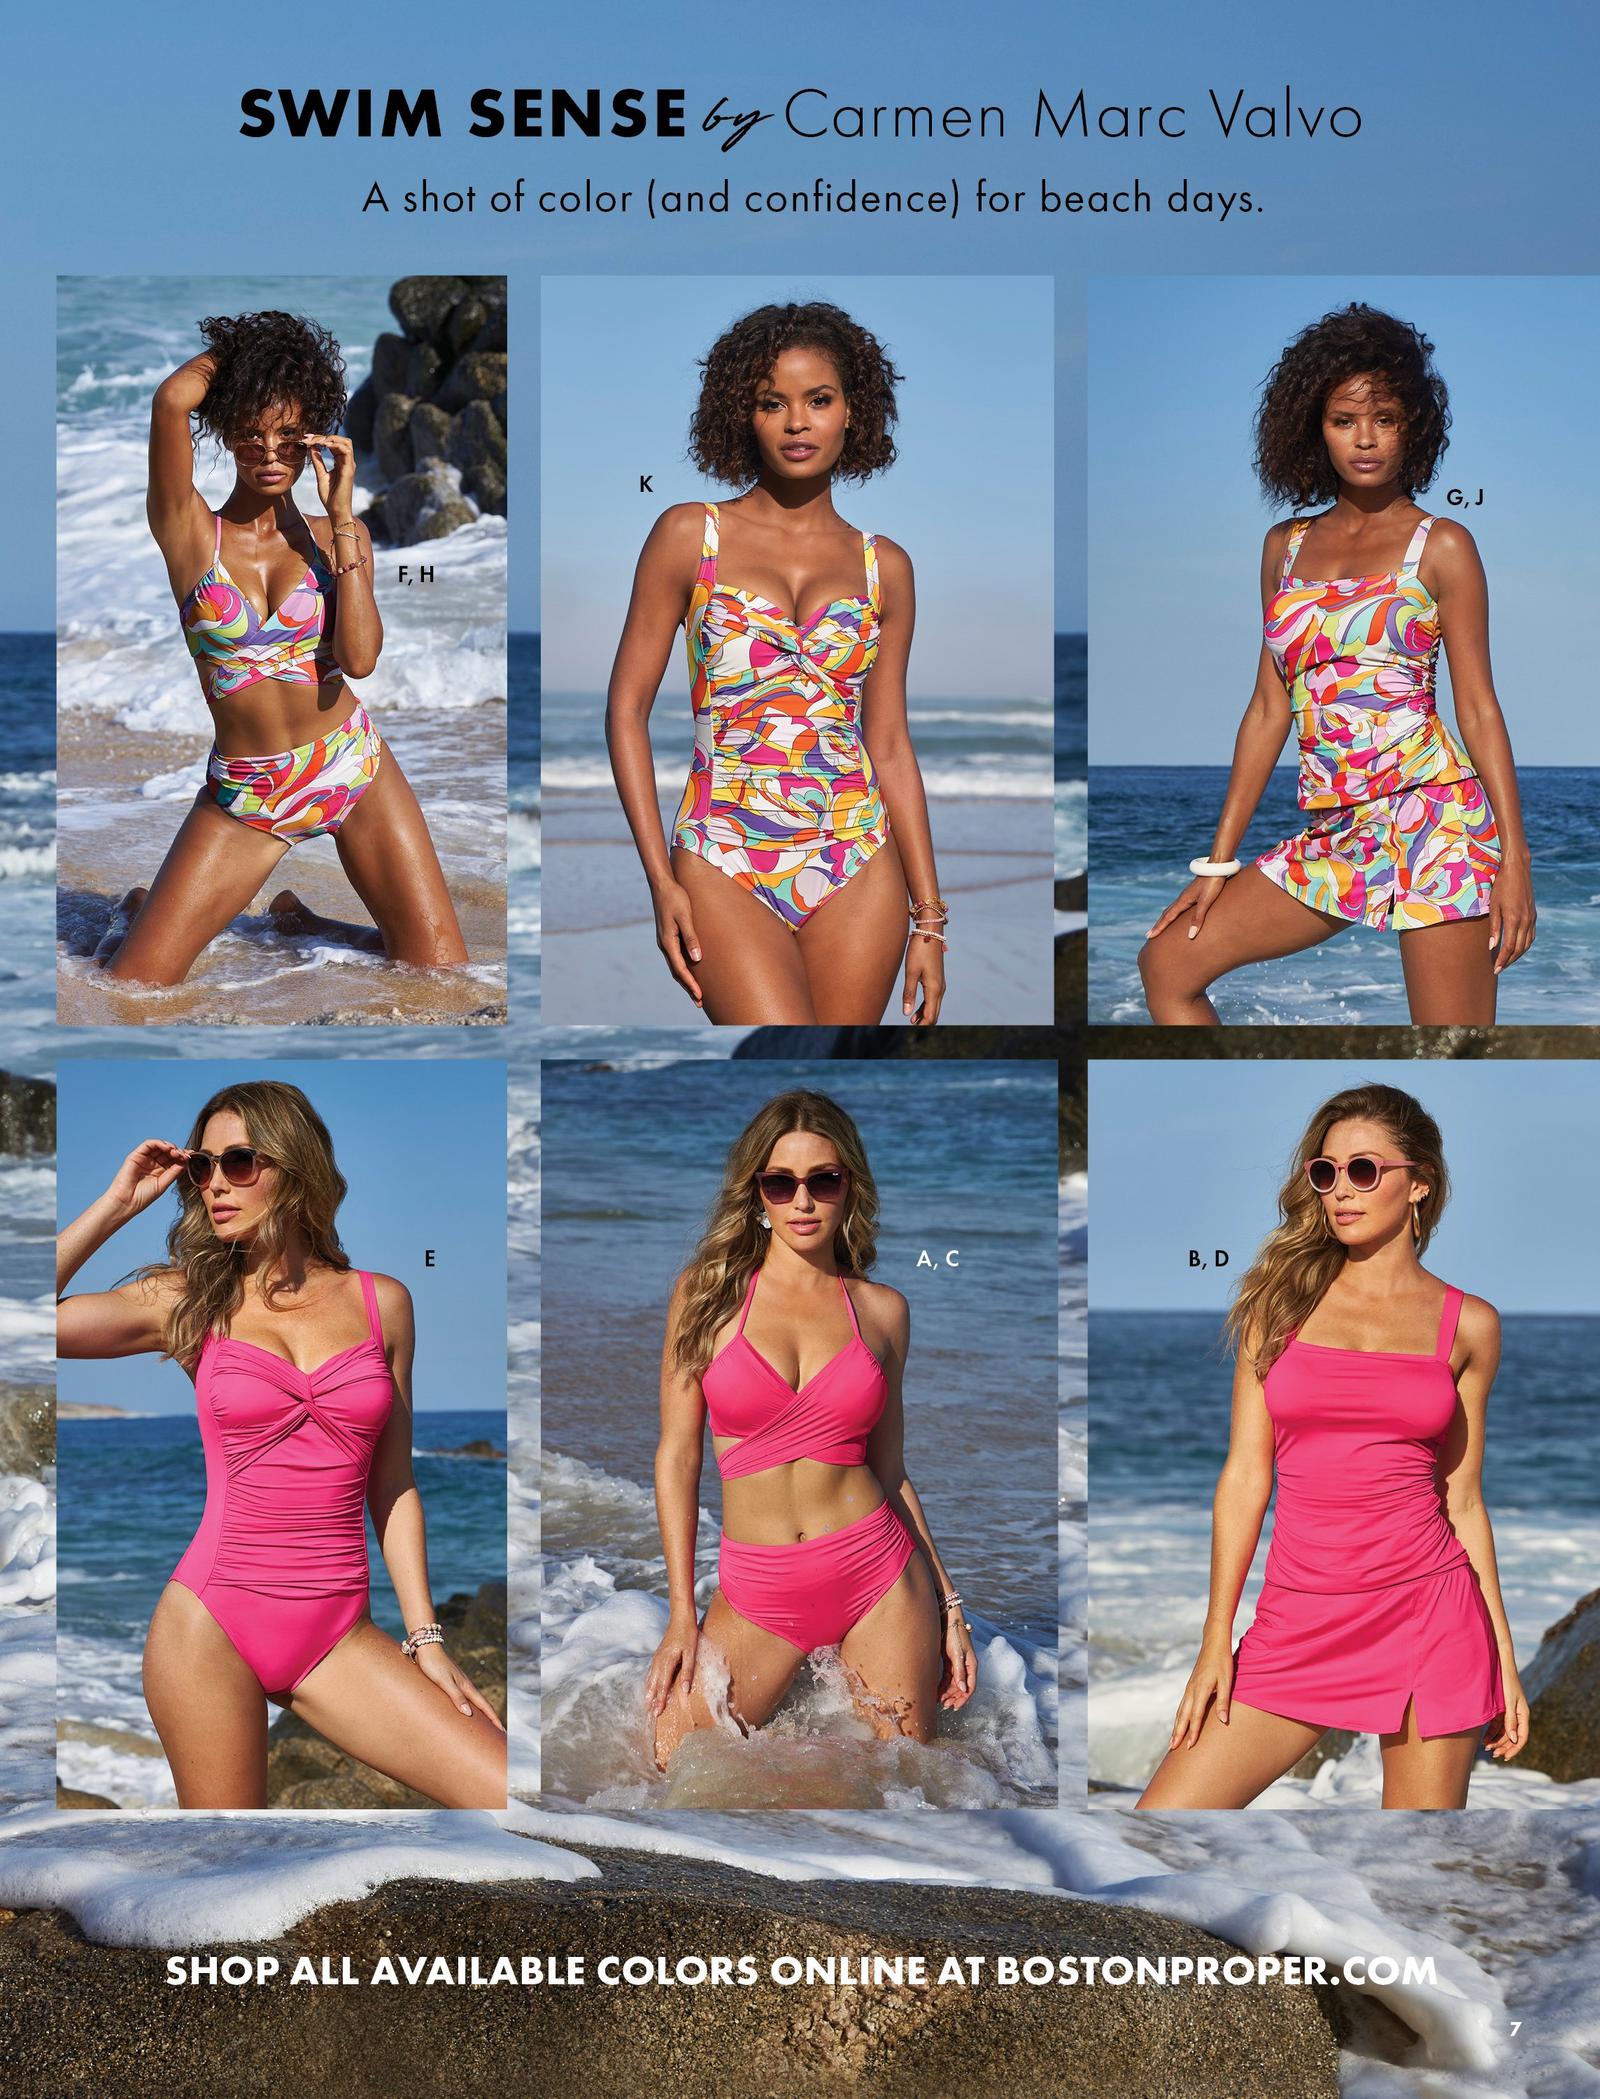 models from left to right, top to bottom: paisley print bikini, paisley print one piece, paisley print tankini with skirted bottom, pink one piece, pink bikini, pink tankini with skirted bottom.